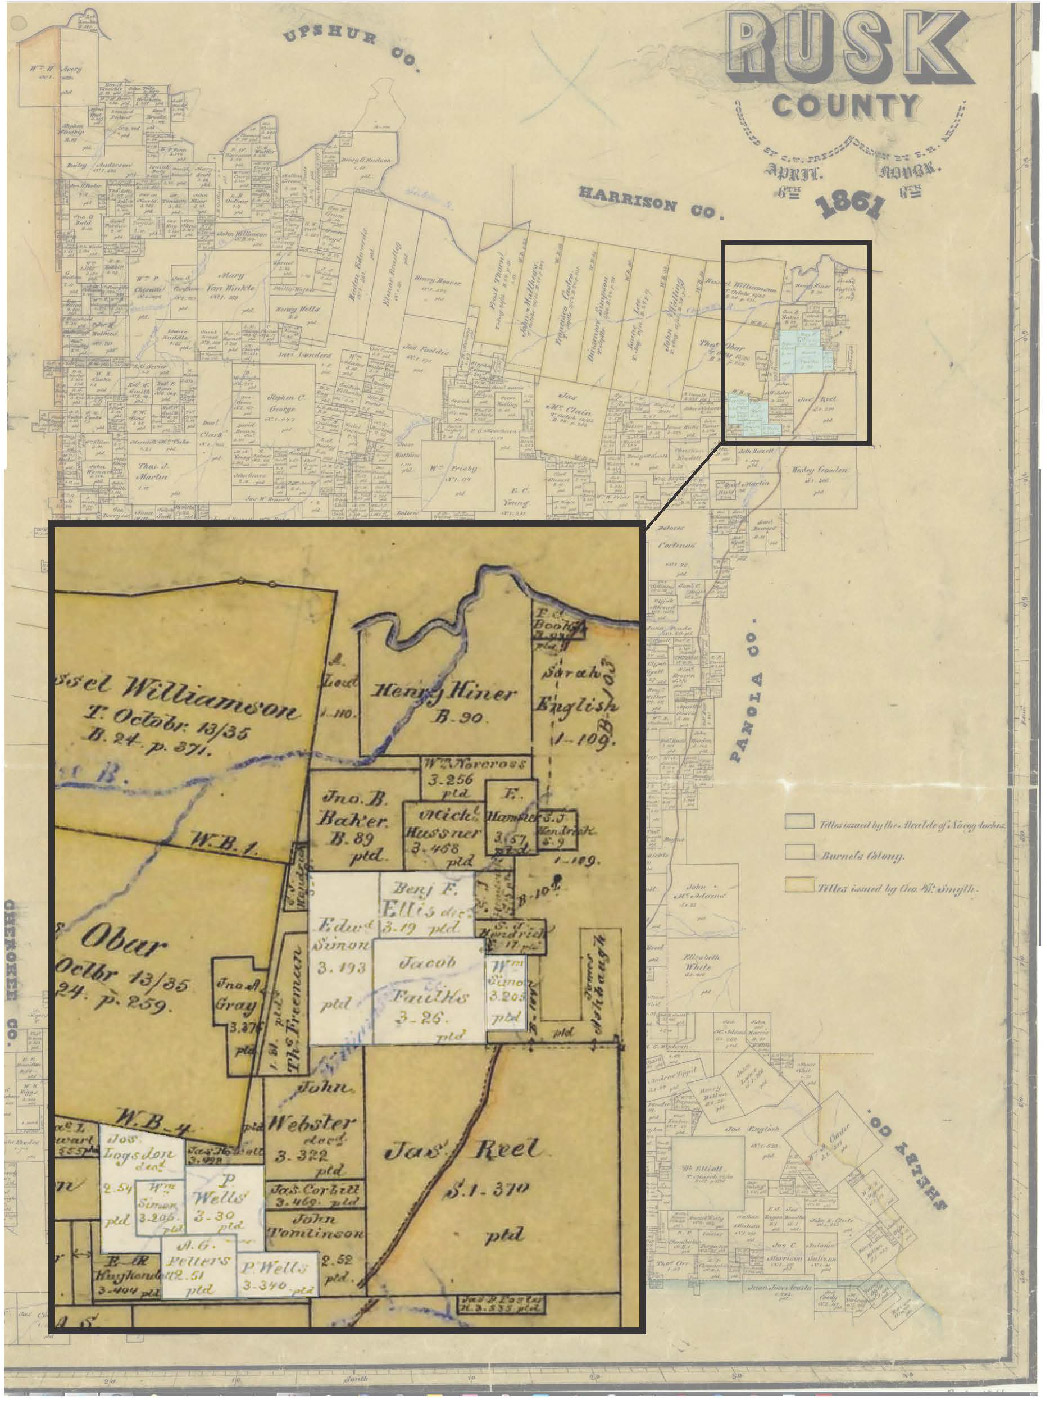 A tan colored historic map of Rusk County with tiny text.